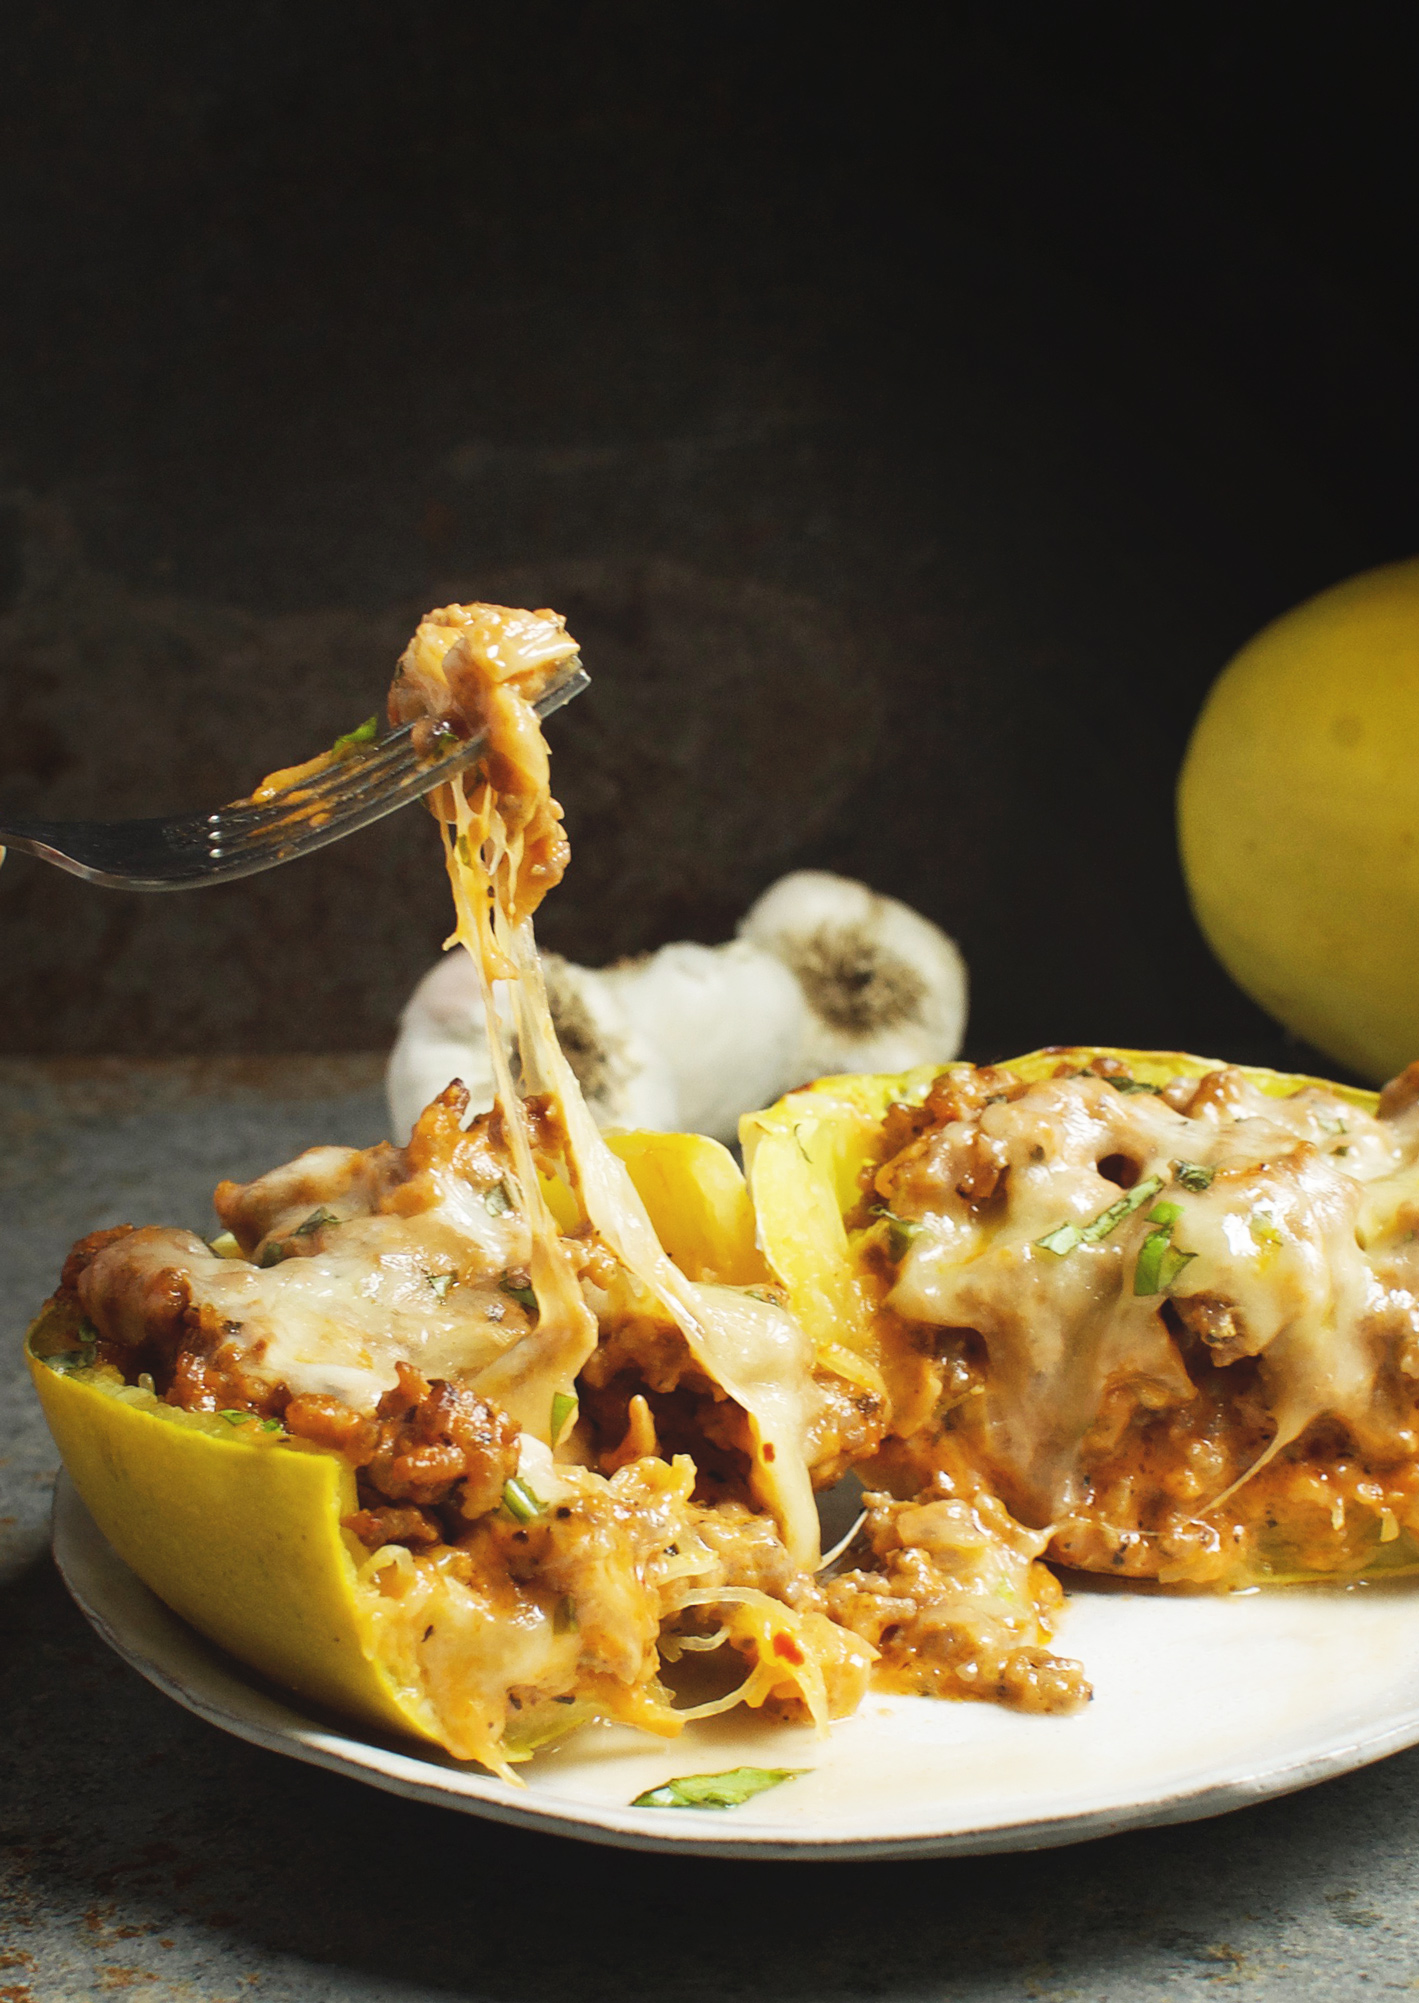 This recipe for Sausage Stuffed Spaghetti Squash takes low-carb eating to a new level! This delicious recipe works for low-carb, ketogenic, gluten-free, grain-free, diabetic, or Banting diets.